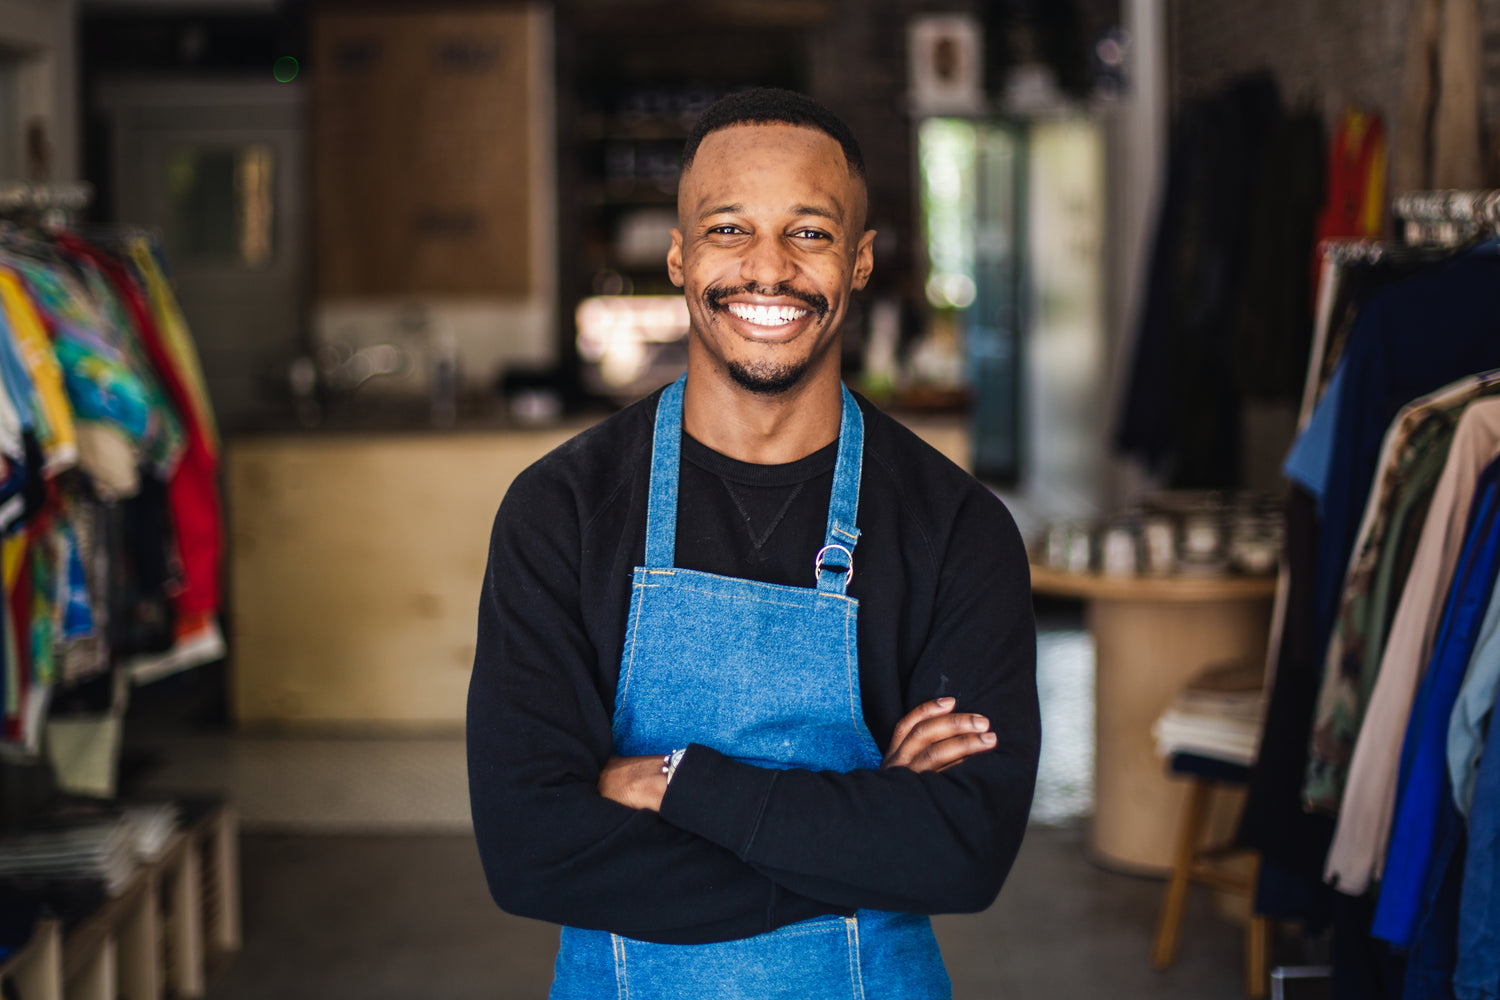 BLACK BUSINESS OWNER IN HIS STORE